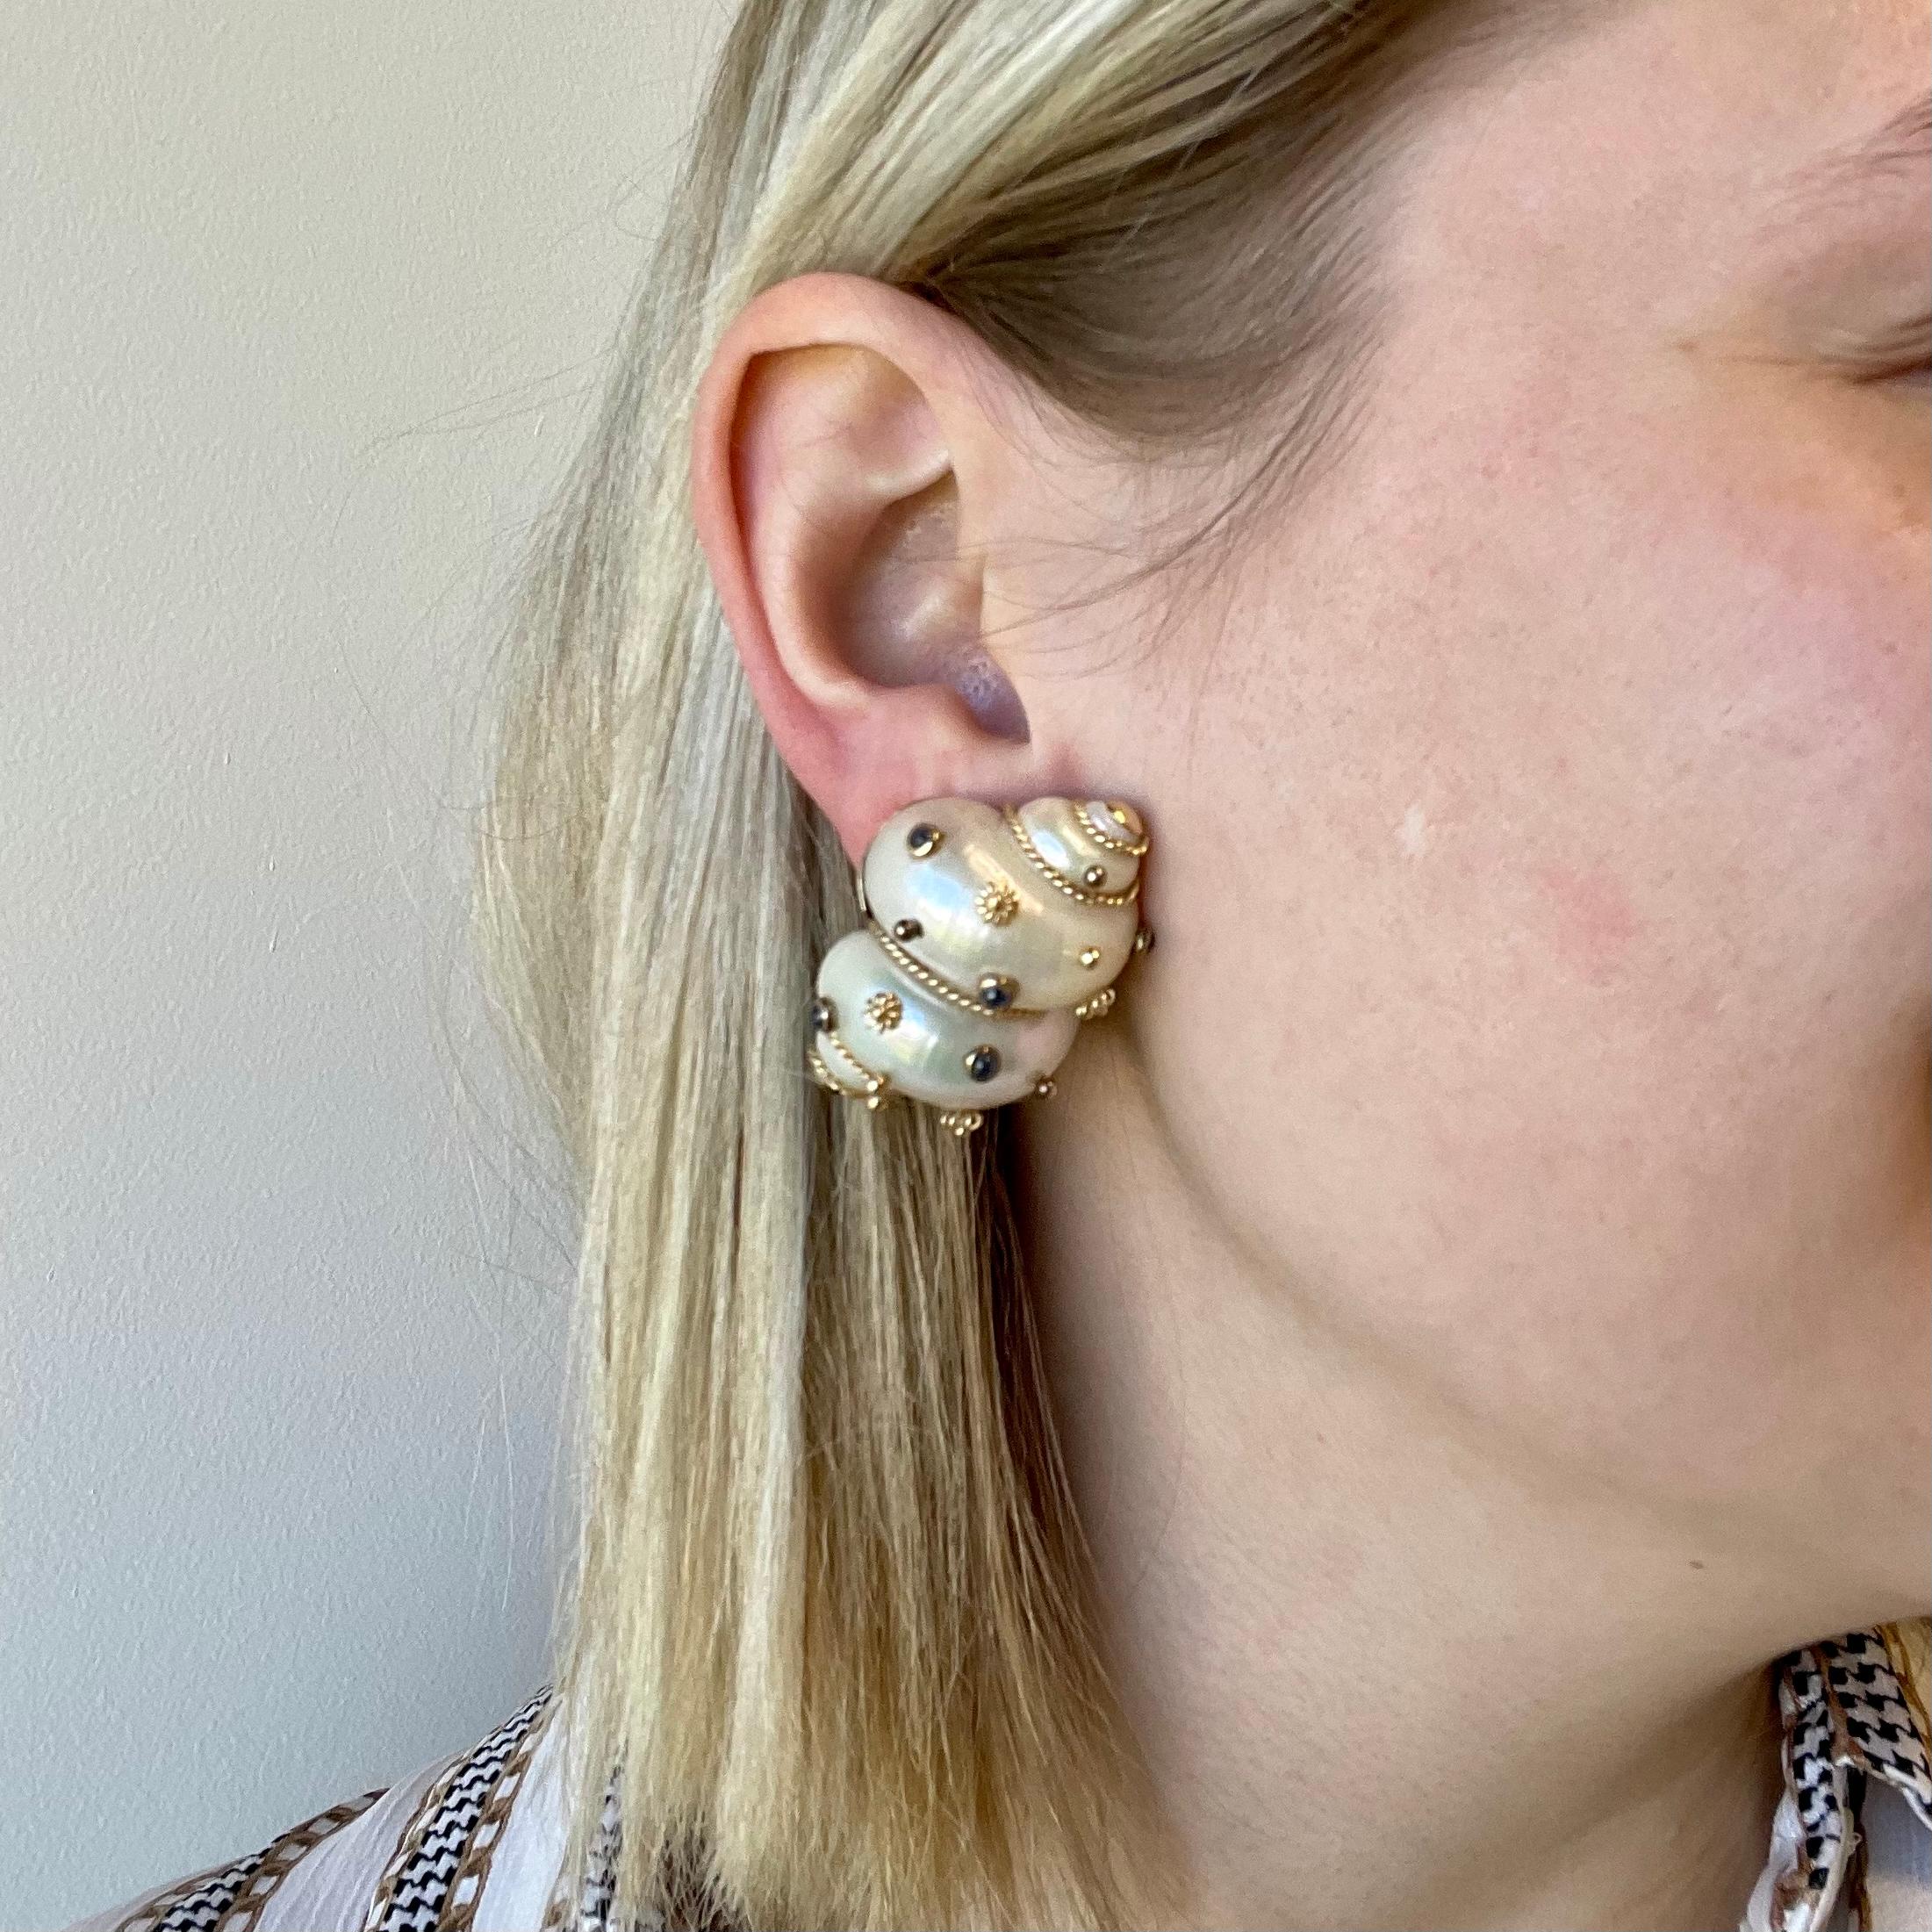 Ear clips were a hot trend during the 1960's and now it's an iconic accessory once again; especially if they're  vintage. Stay on top of the fashion trends with these Vintage Maz created Sapphire 14k Gold Mother Of Pearl Seashell Earrings. 

The